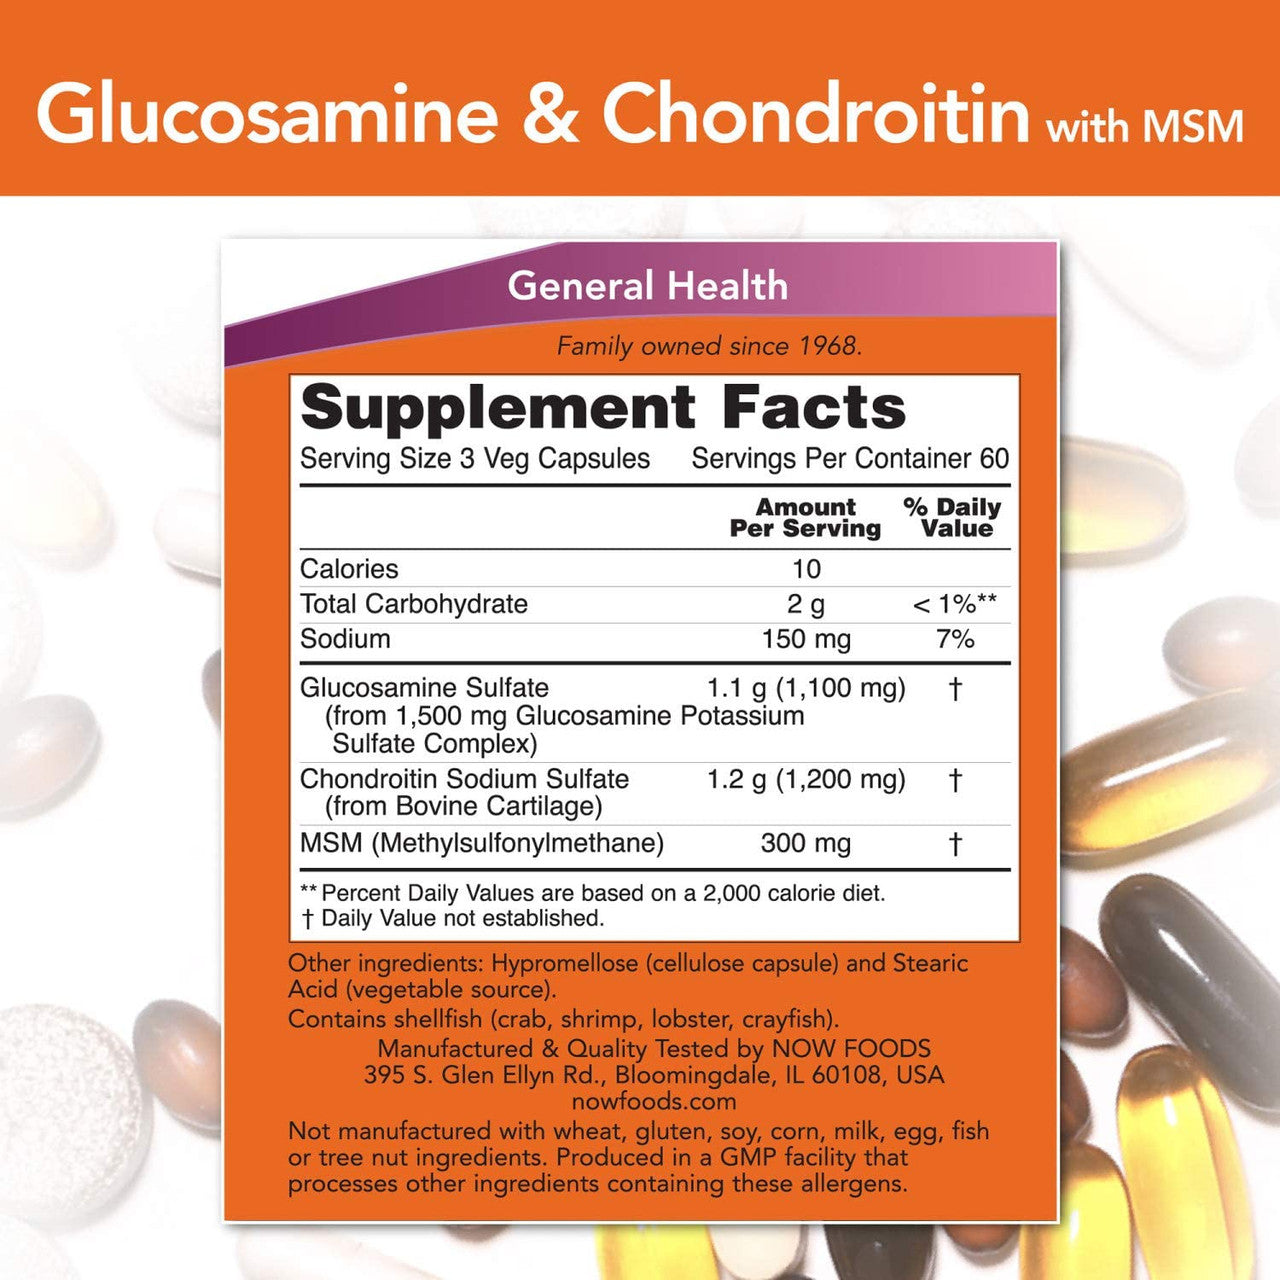 Now Glucosamine & Chondroitin MSM supplement facts